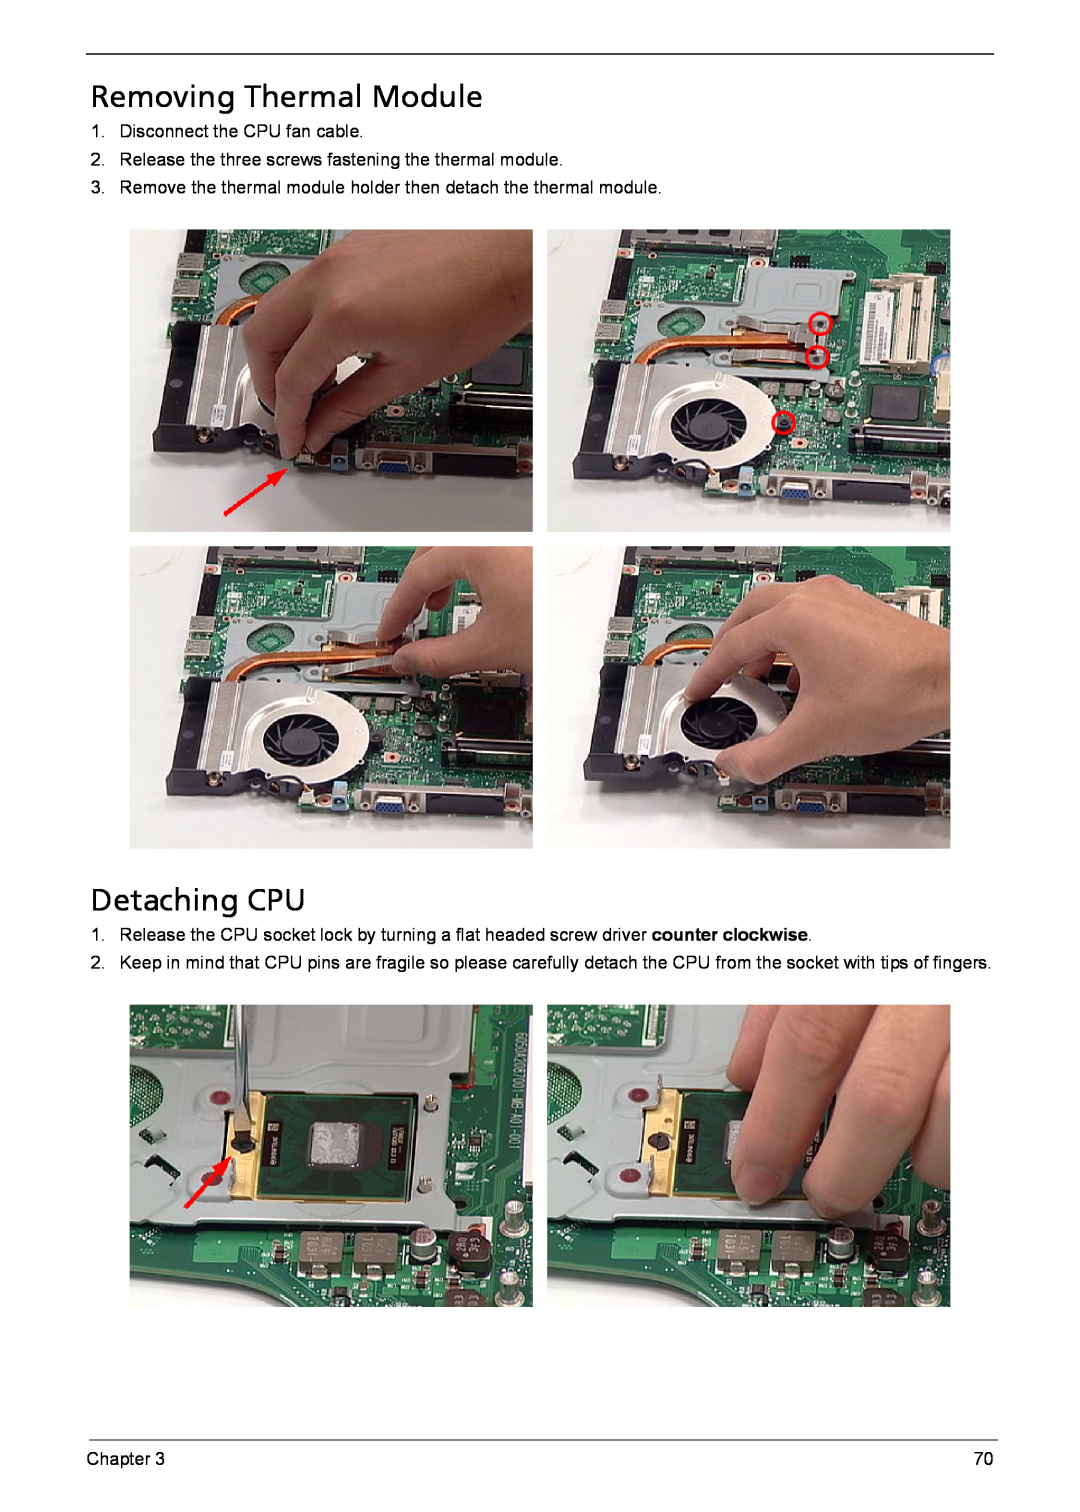 Acer 6410, 6460 manual Removing Thermal Module, Detaching CPU, Disconnect the CPU fan cable, Chapter 